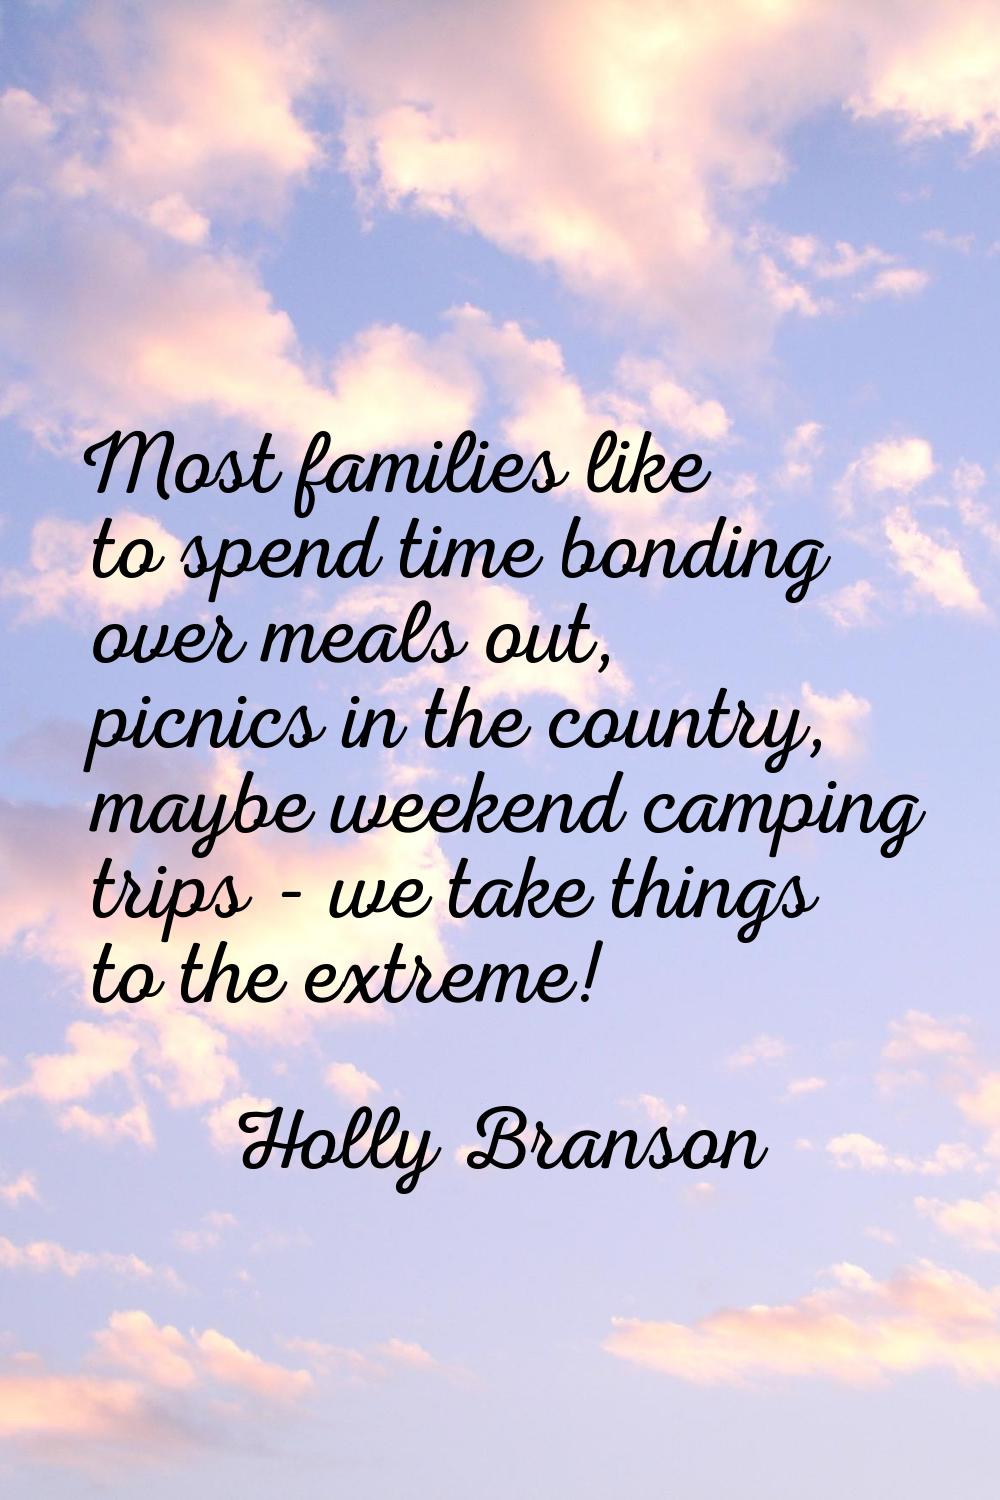 Most families like to spend time bonding over meals out, picnics in the country, maybe weekend camp